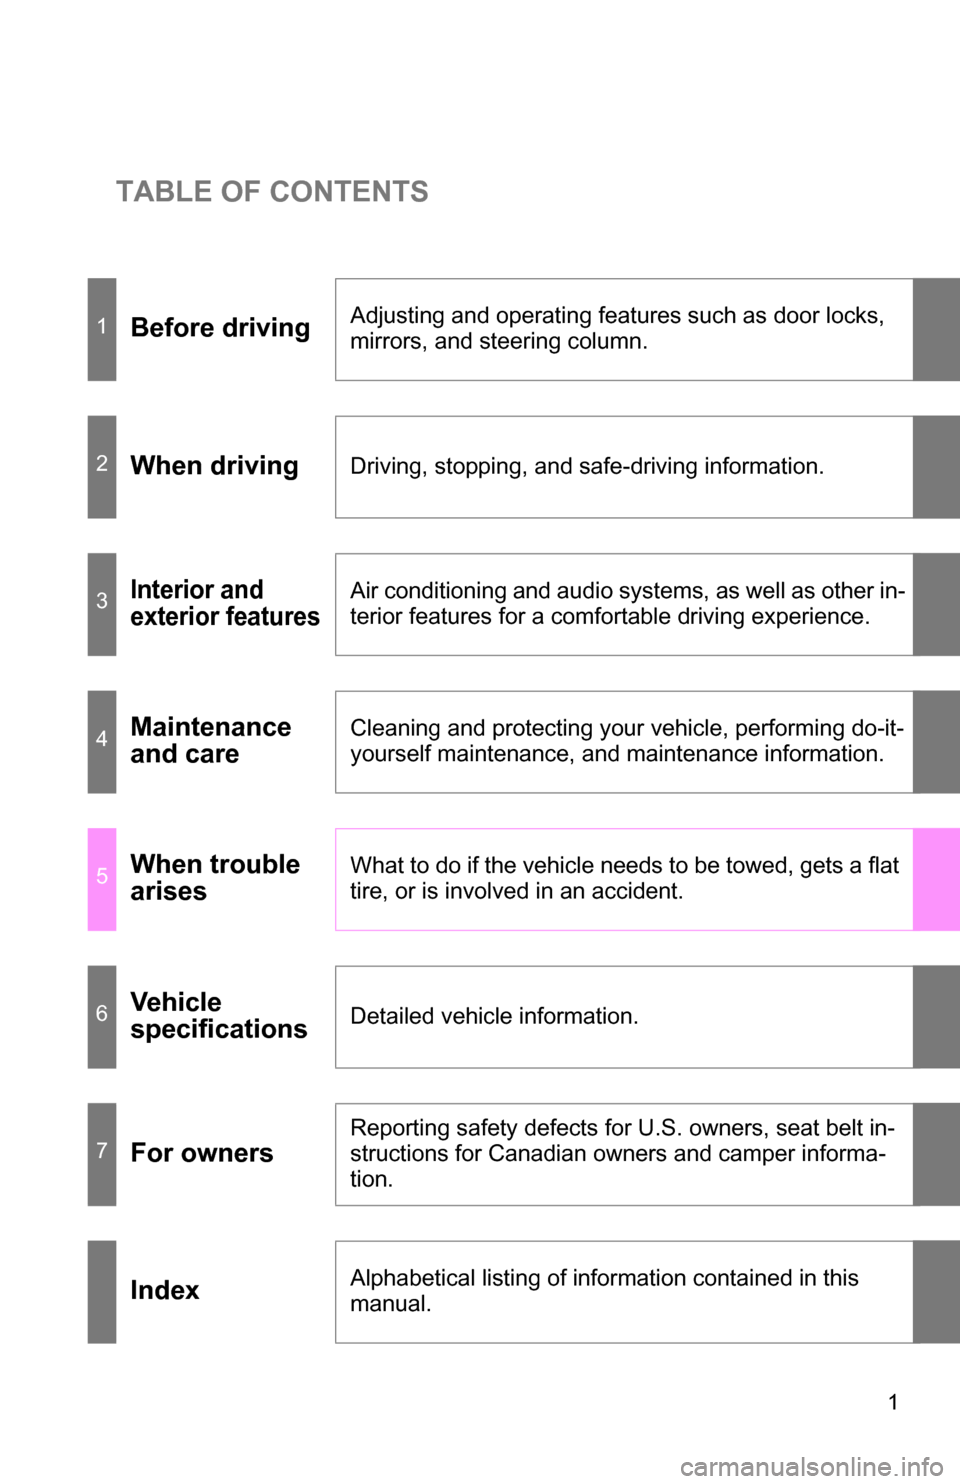 TOYOTA TUNDRA 2009 2.G Owners Manual TABLE OF CONTENTS
1
1Before drivingAdjusting and operating features such as door locks, 
mirrors, and steering column.
2When drivingDriving, stopping, and safe-driving information.
3Interior and 
exte